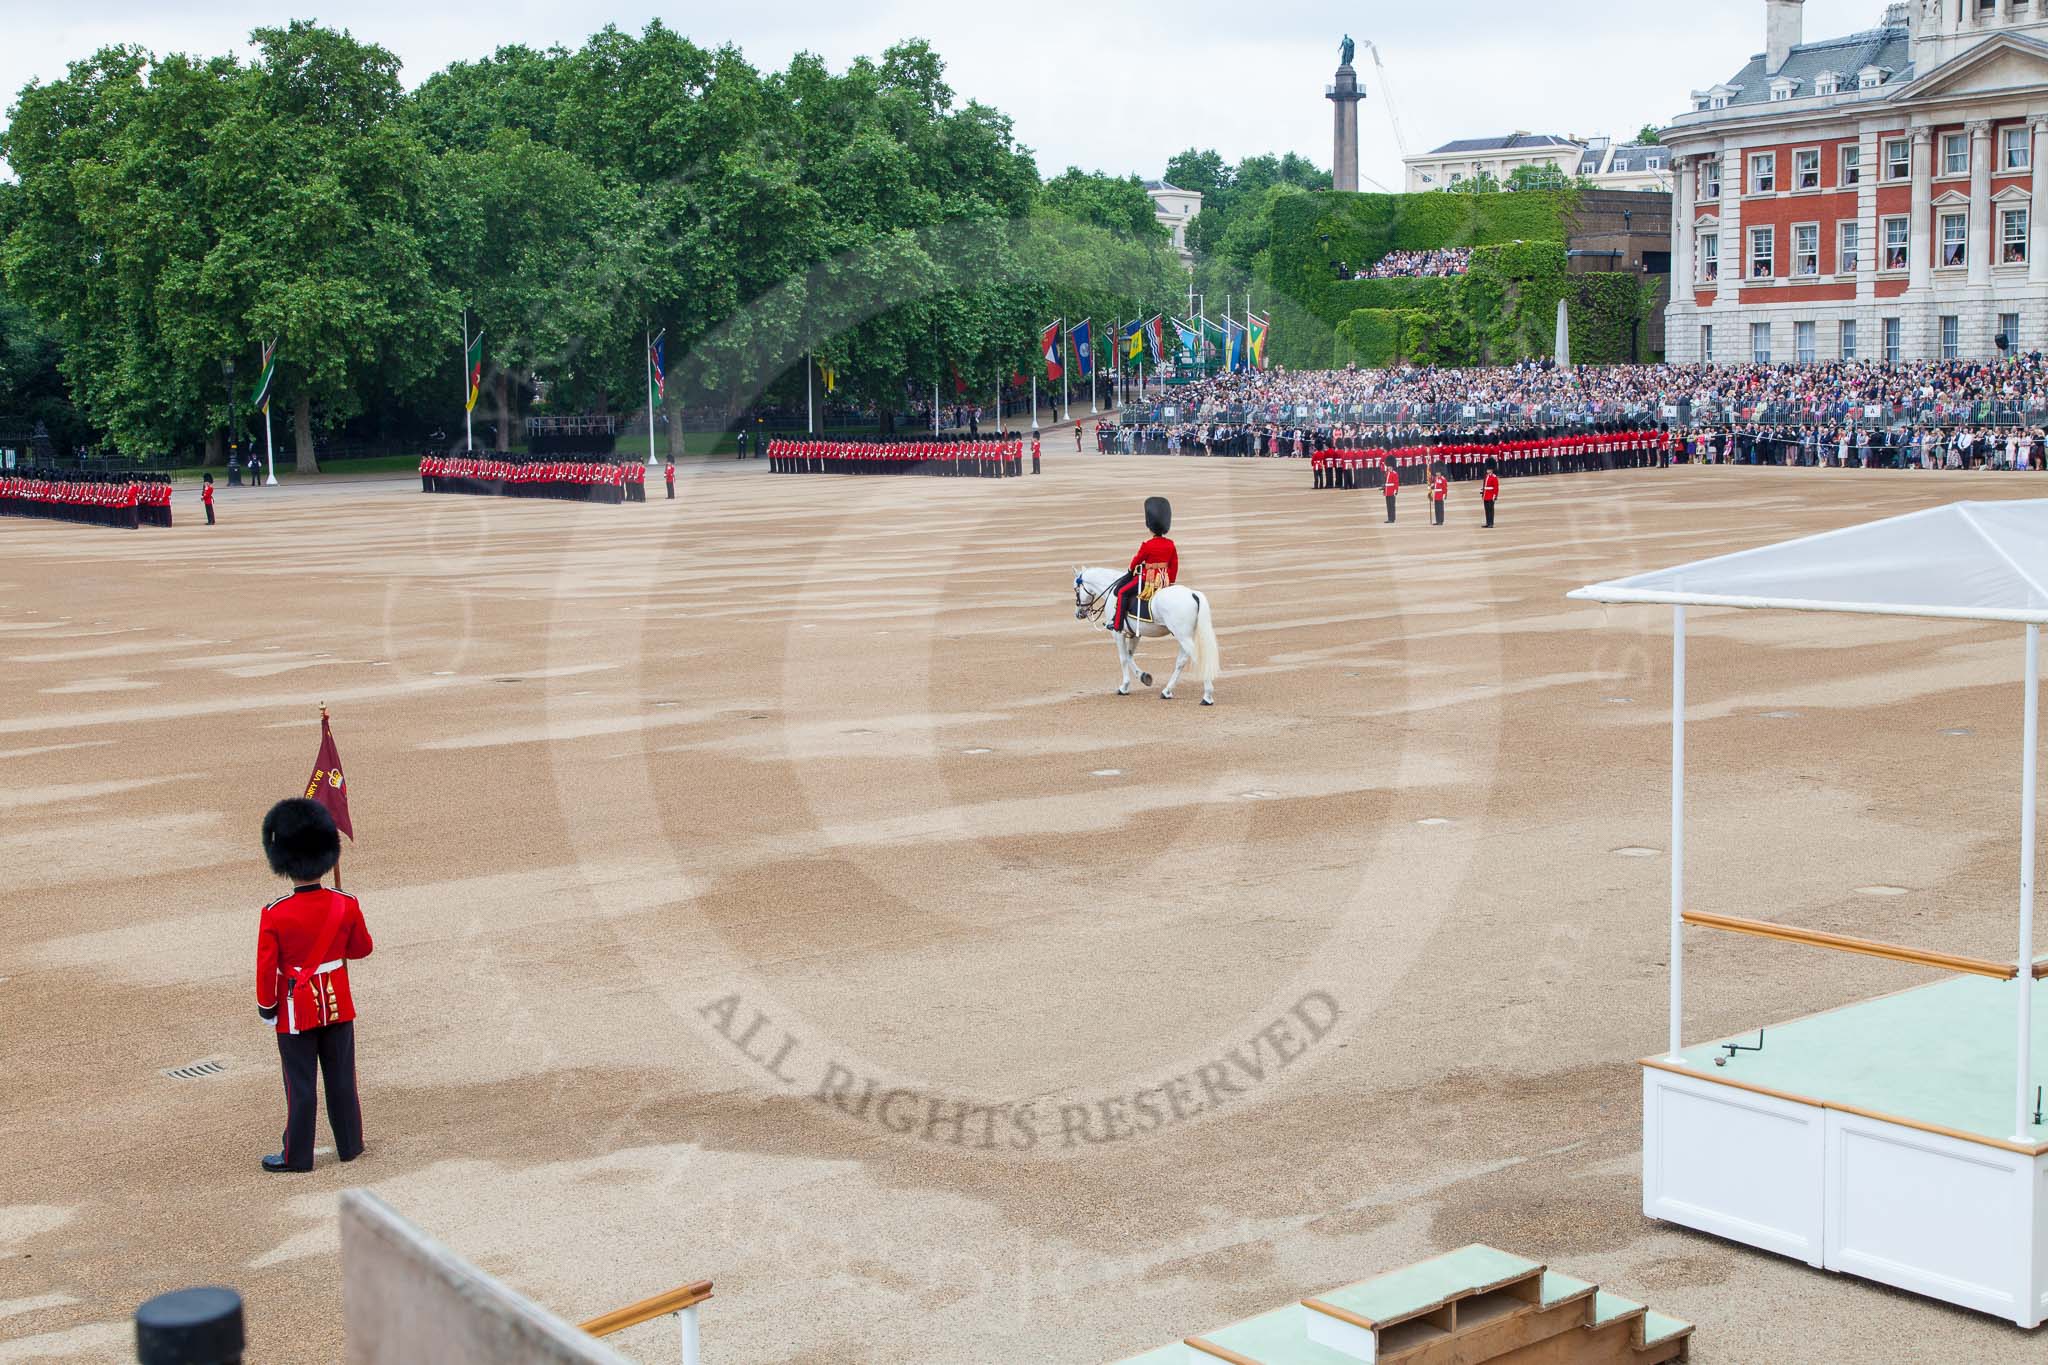 Trooping the Colour 2014.
Horse Guards Parade, Westminster,
London SW1A,

United Kingdom,
on 14 June 2014 at 10:35, image #220